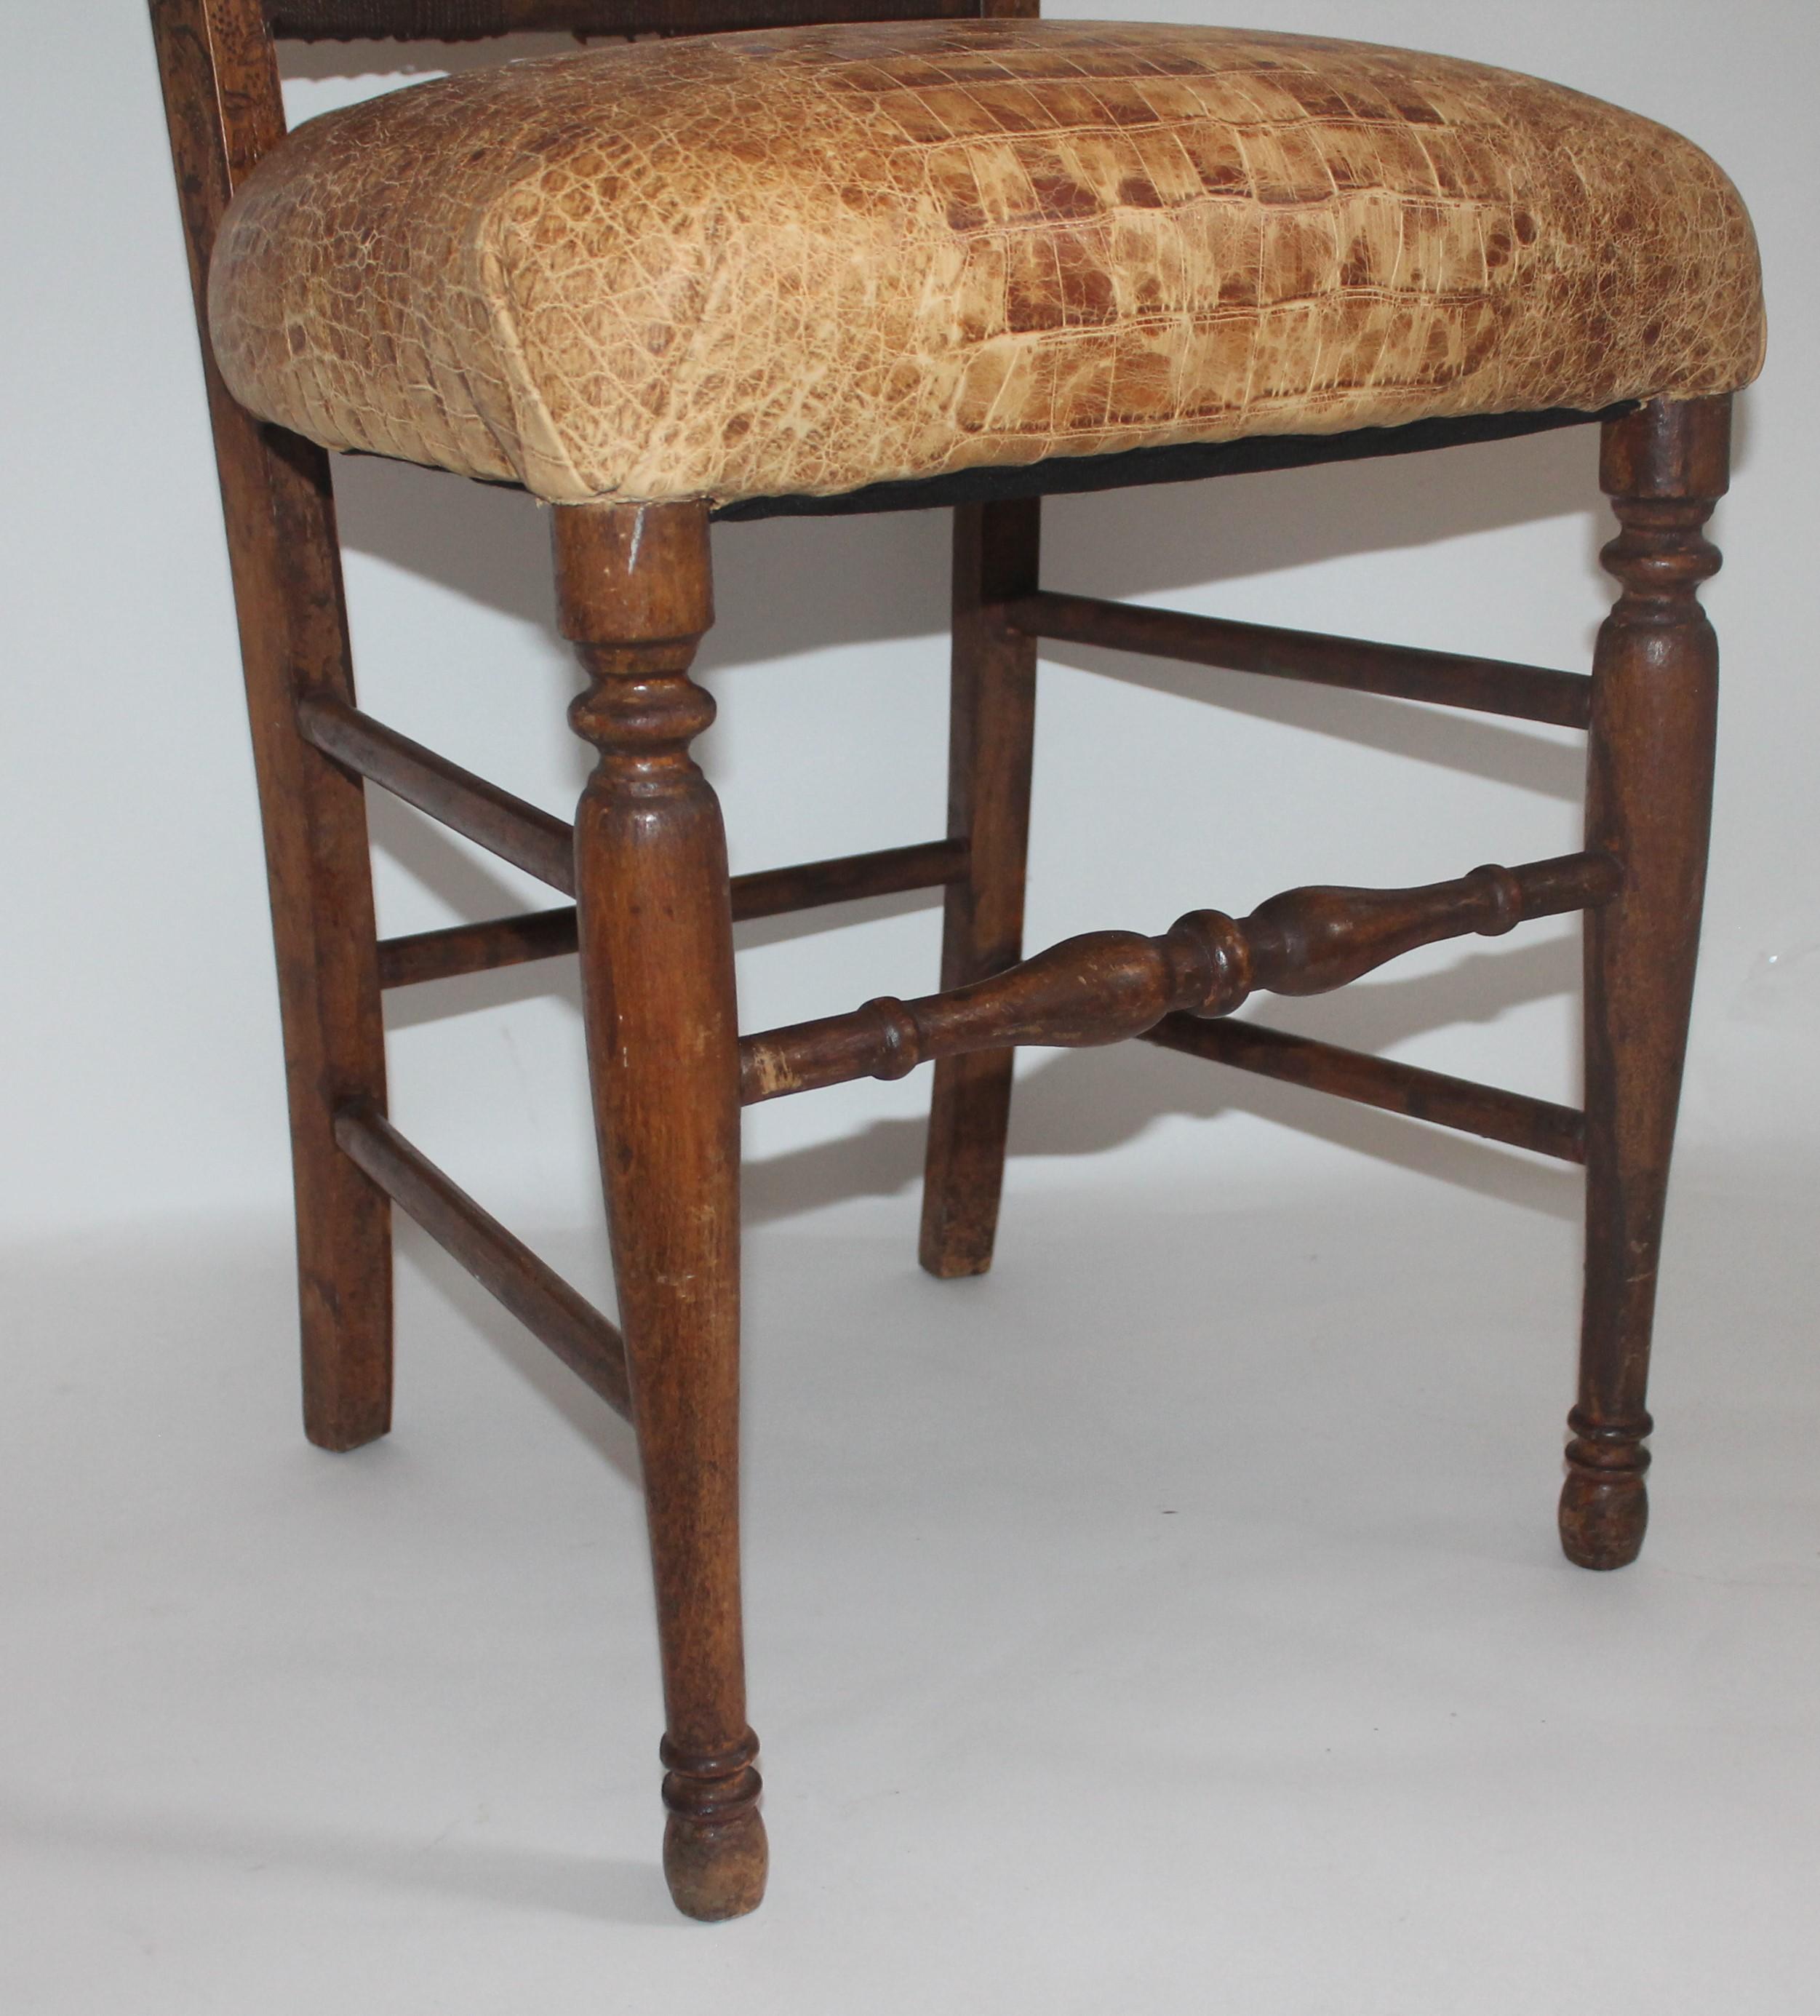 Hand-Carved 19th Century Handmade English Chess Carved Chair For Sale